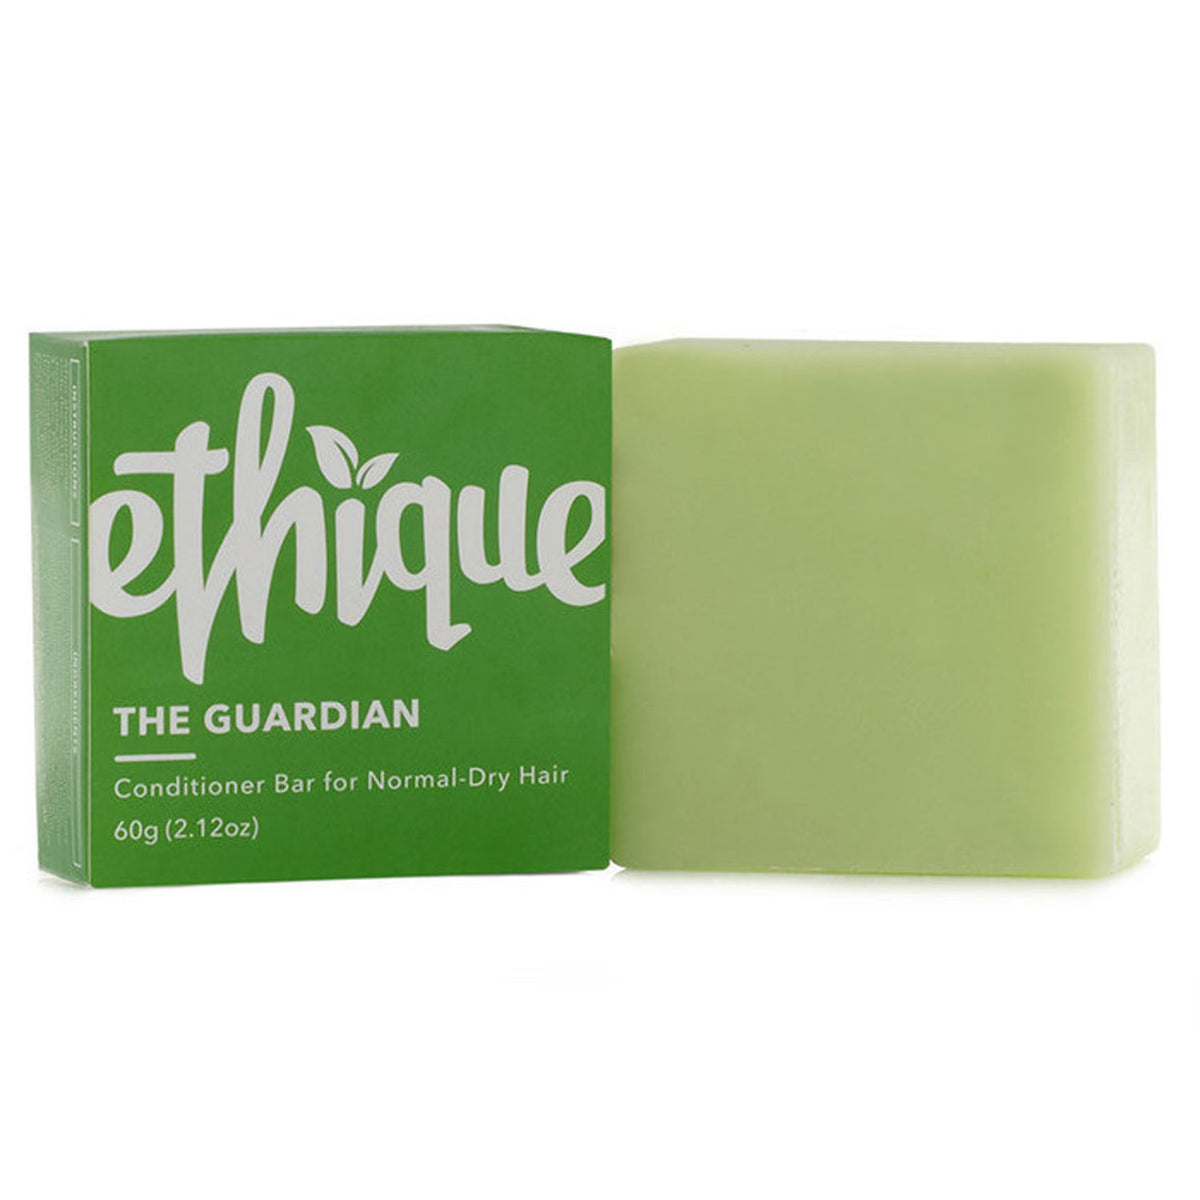 Ethique The Guardian Conditioner Bar For Dry, Damaged Hair 60g - Orcadia